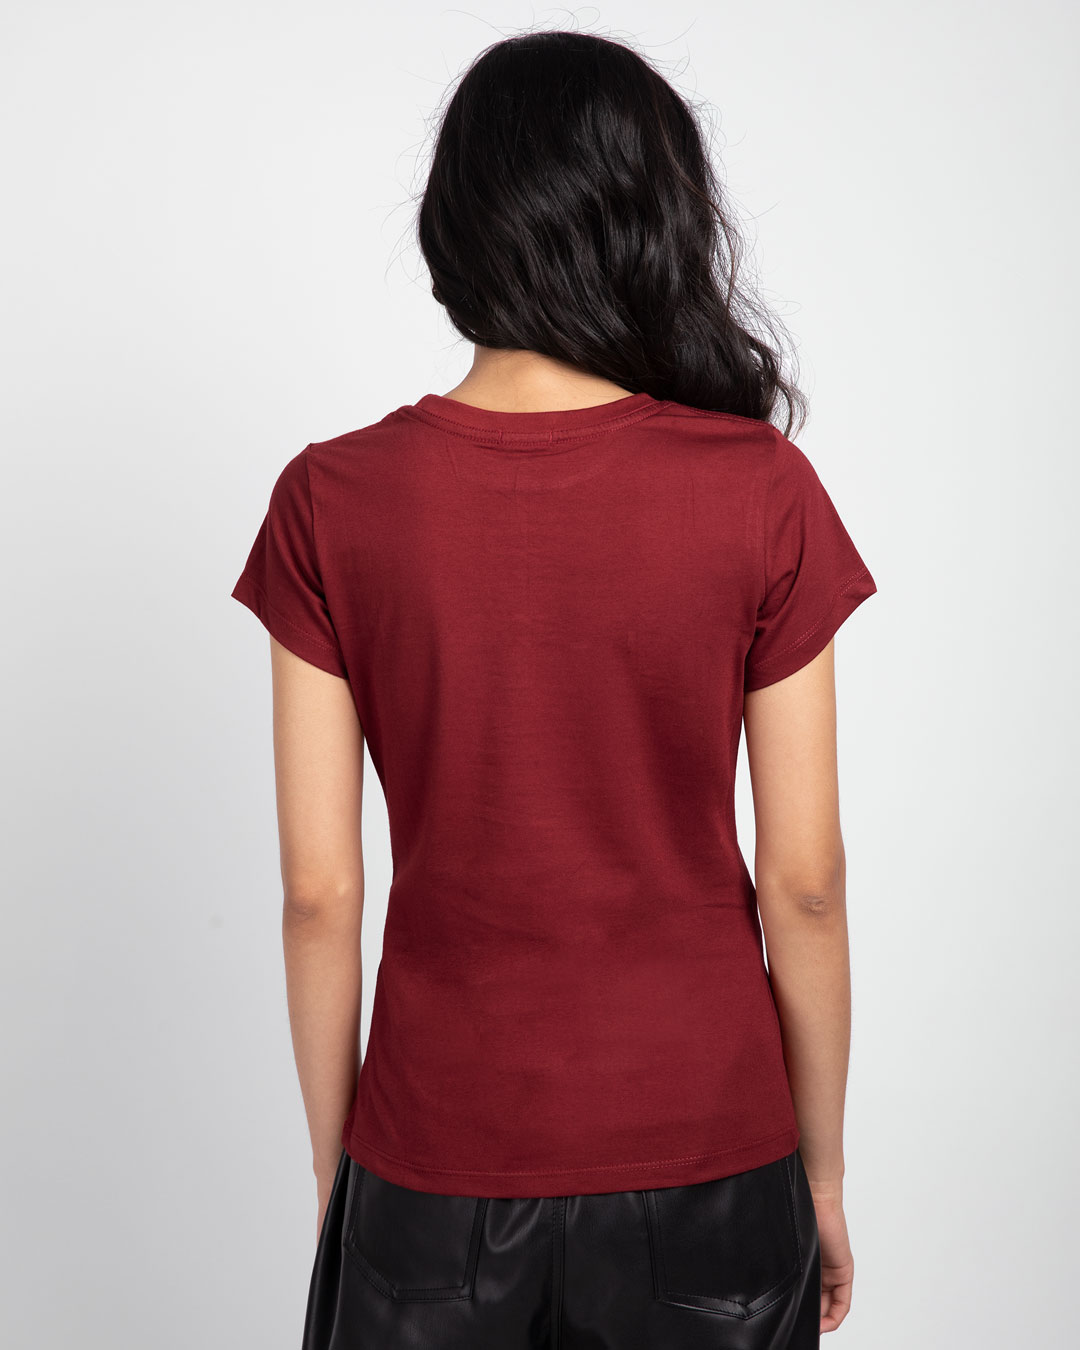 Shop Too Cute Jerry Half Sleeve T-Shirt (TJL) Scarlet Red-Back